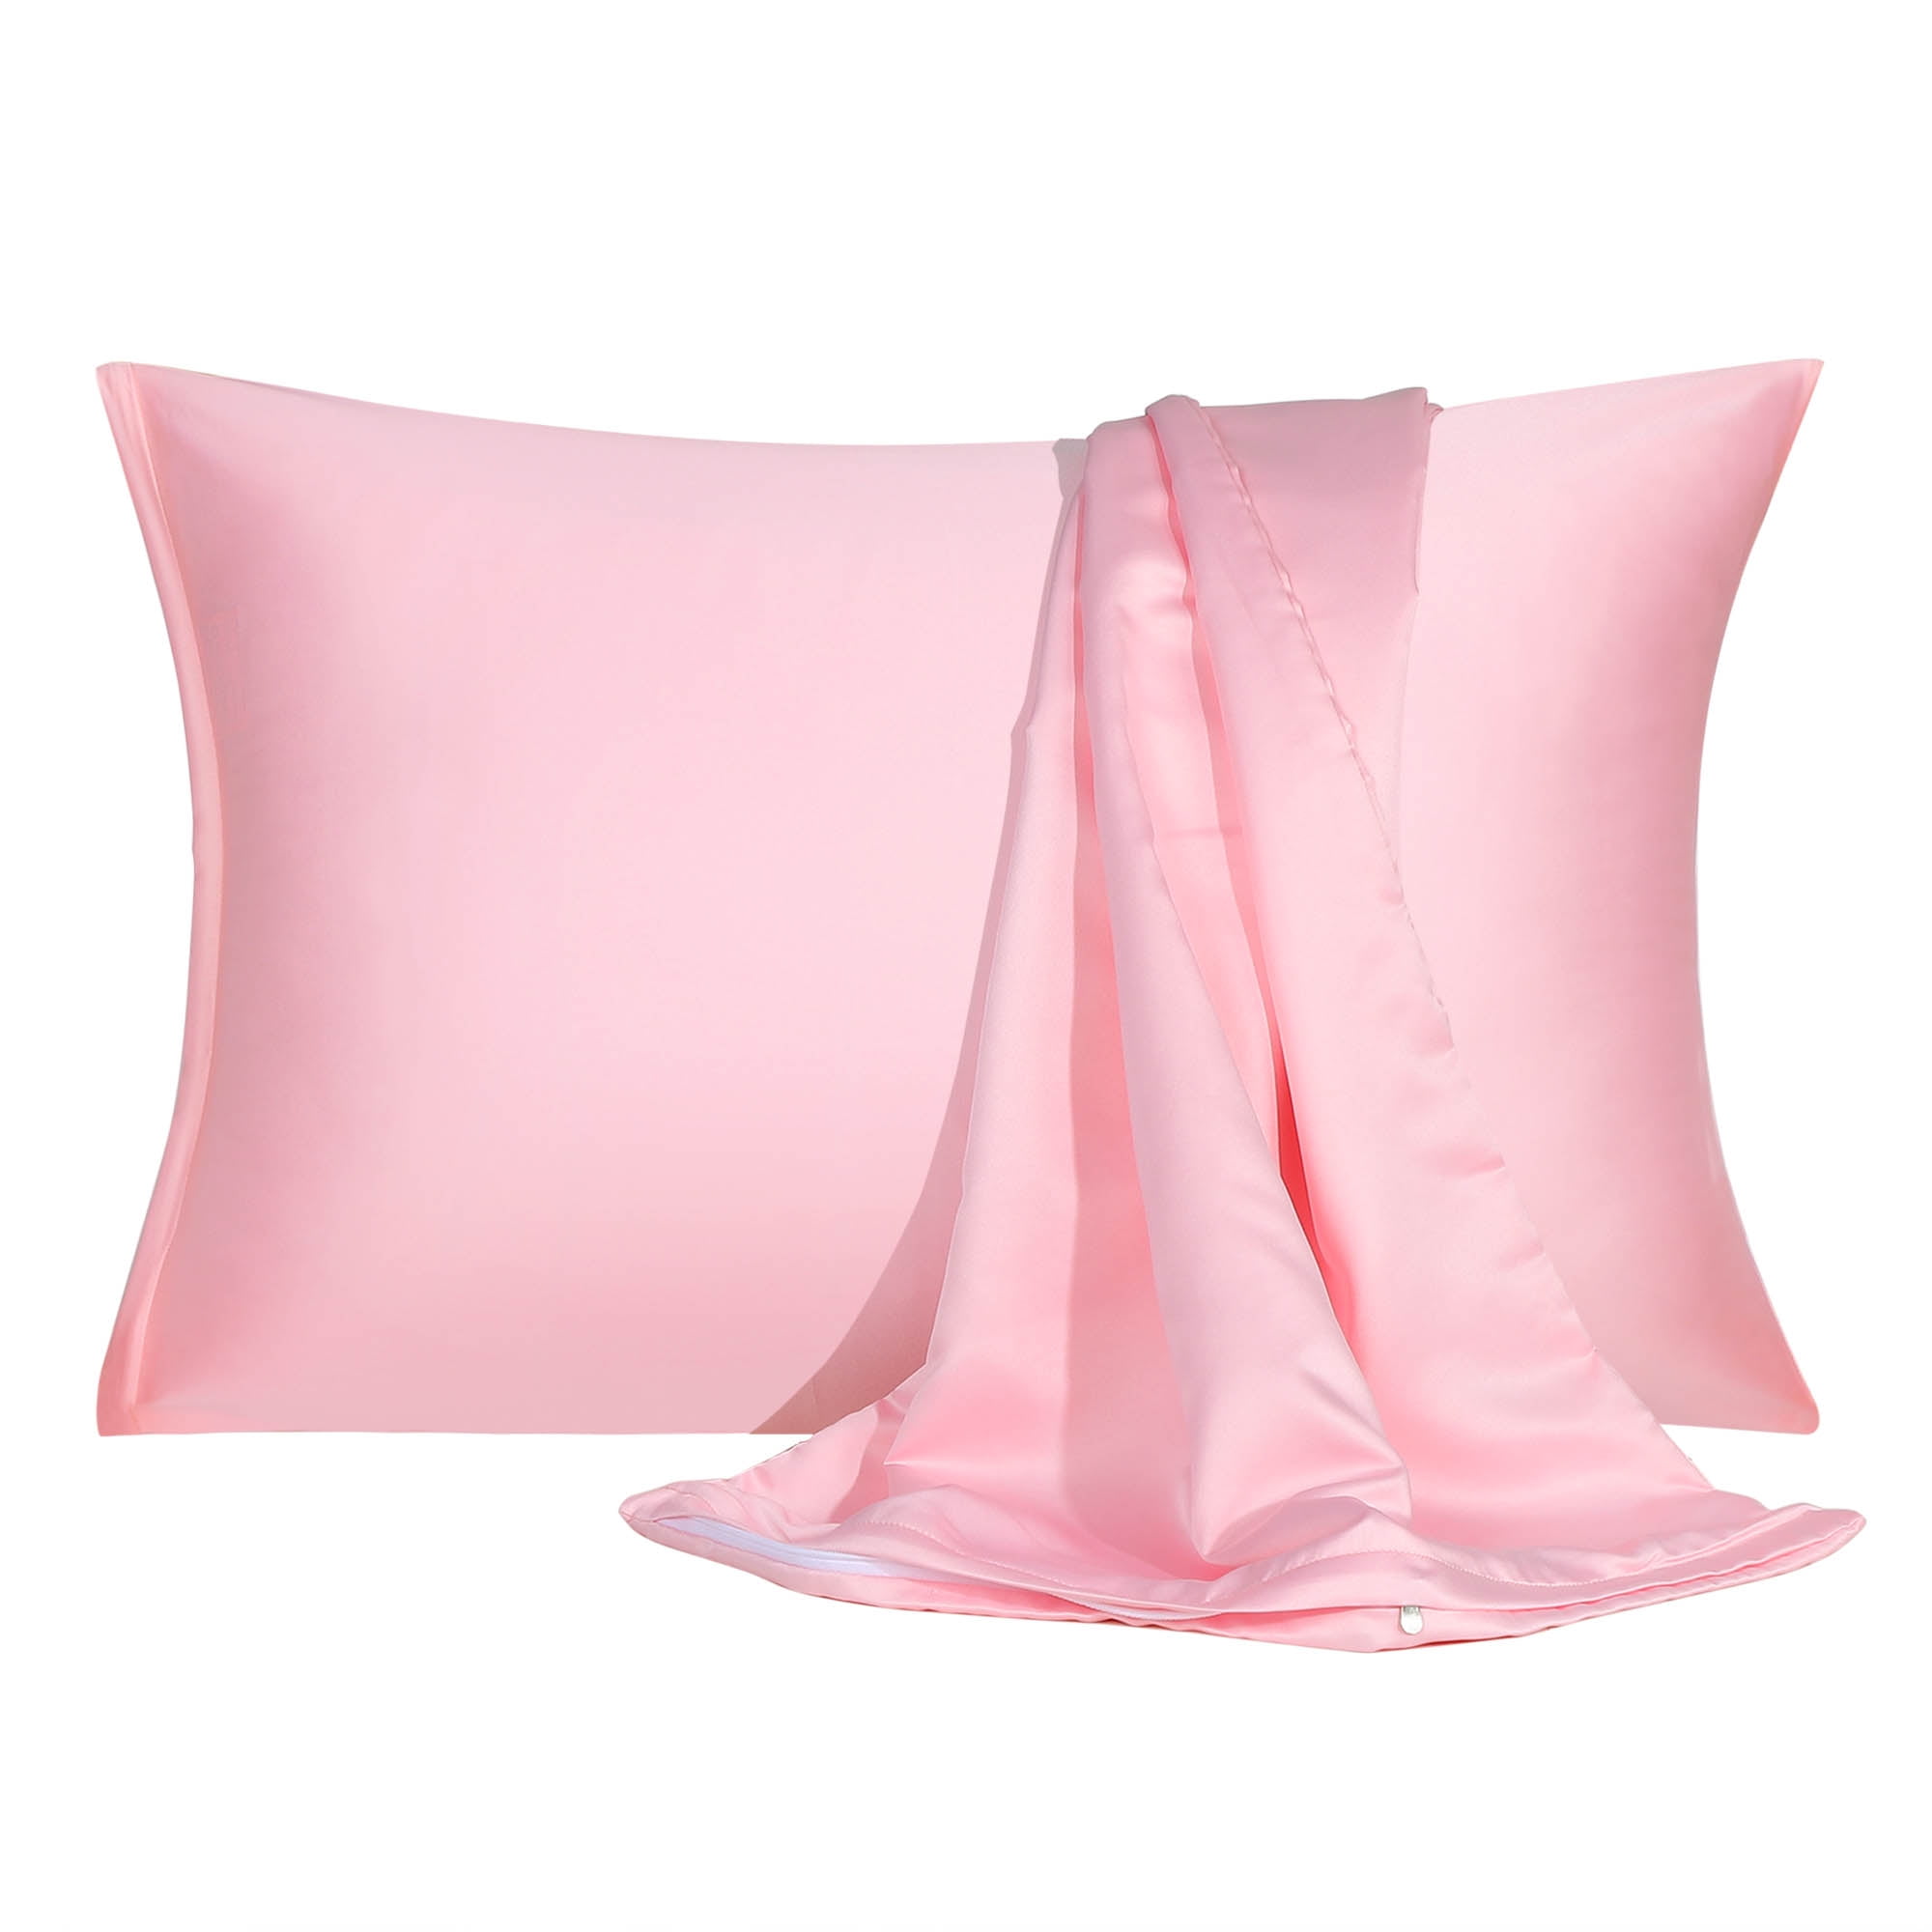 Satin Pillowcase With Zipper King Size Set Of 2 Silky Sateen Pillow Cases Covers Blush Walmart